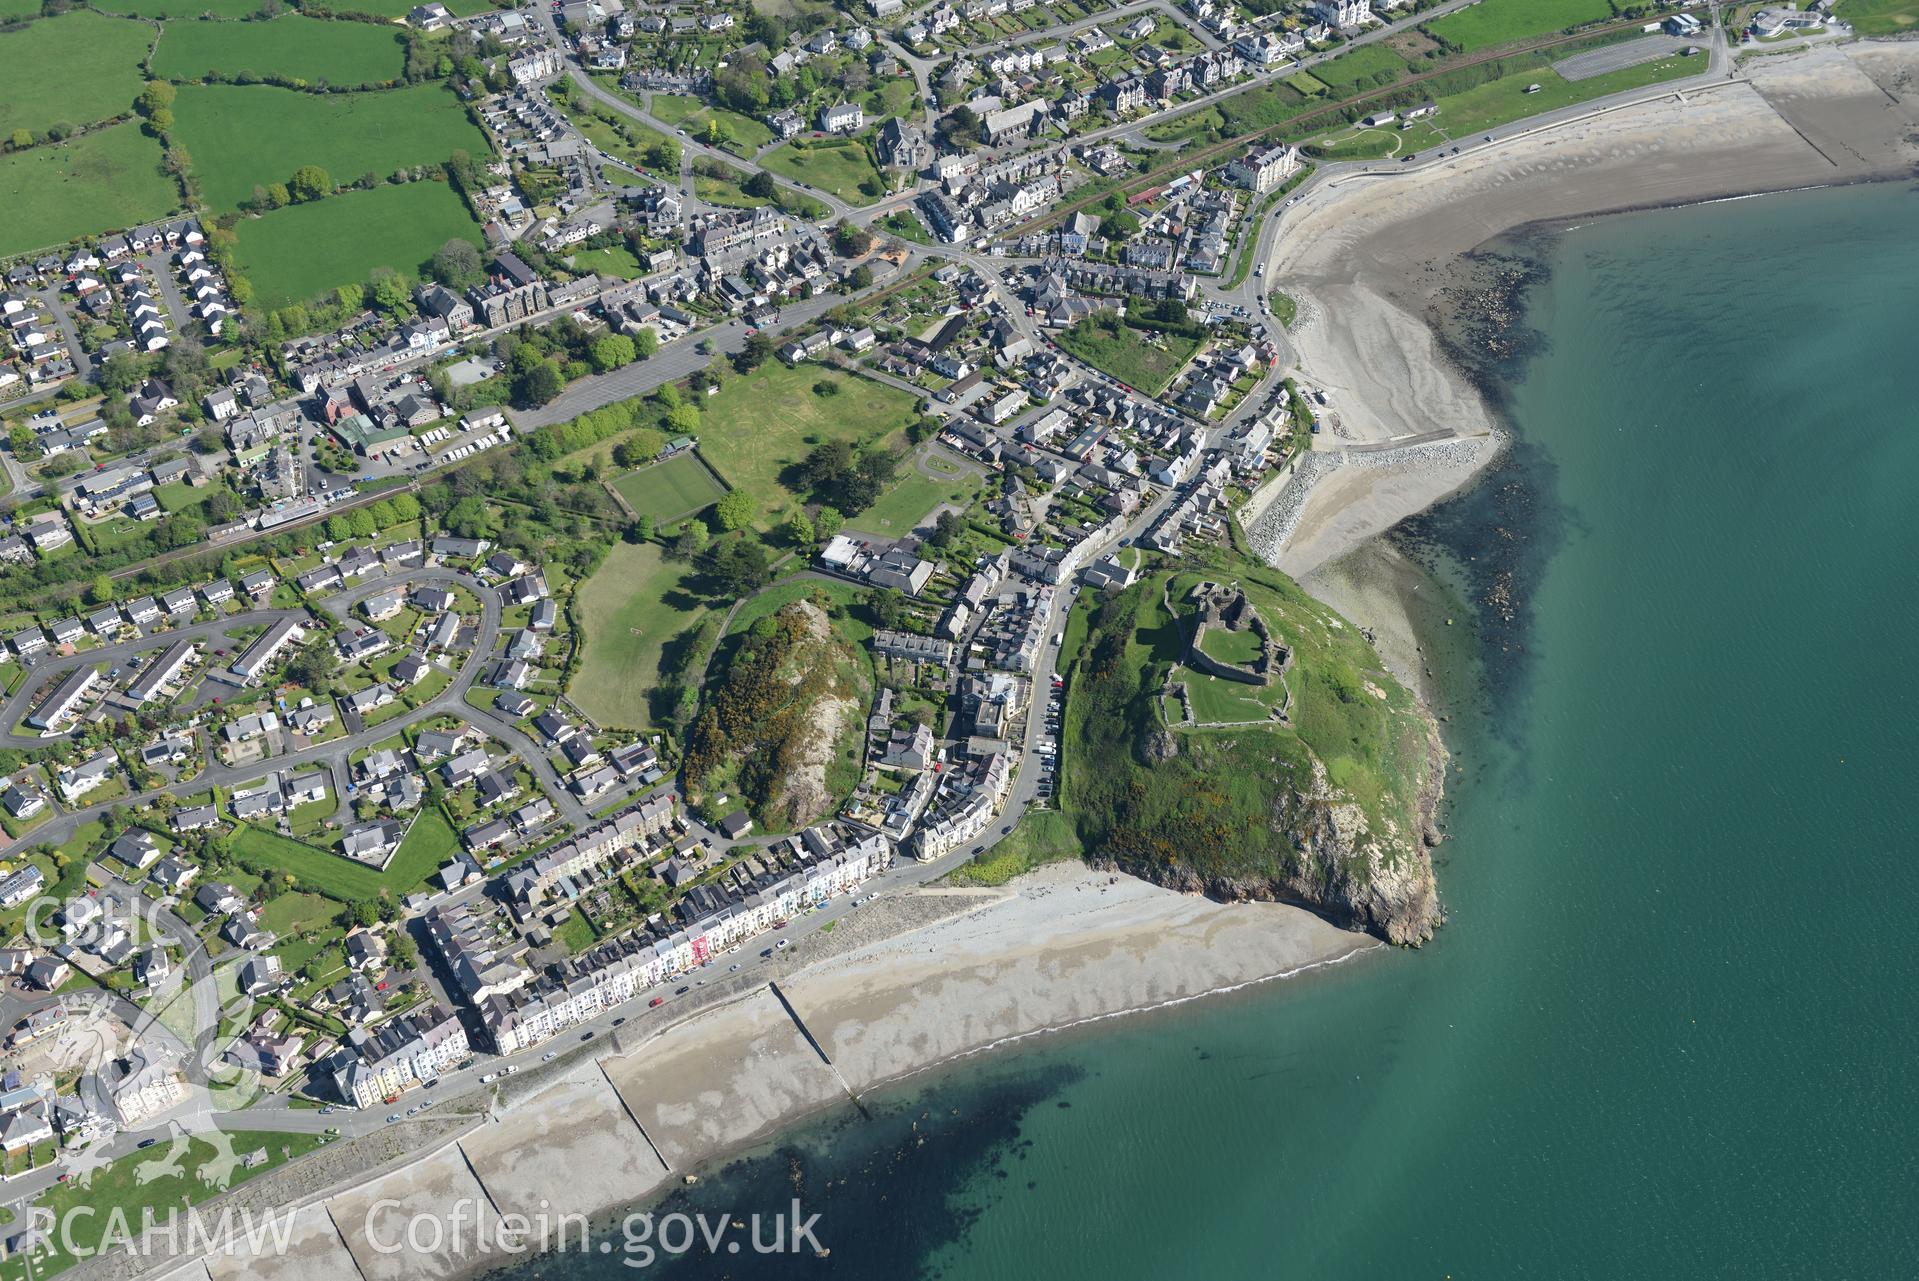 Aerial photography of Criccieth and its castle taken on 3rd May 2017.  Baseline aerial reconnaissance survey for the CHERISH Project. ? Crown: CHERISH PROJECT 2017. Produced with EU funds through the Ireland Wales Co-operation Programme 2014-2020. All ma